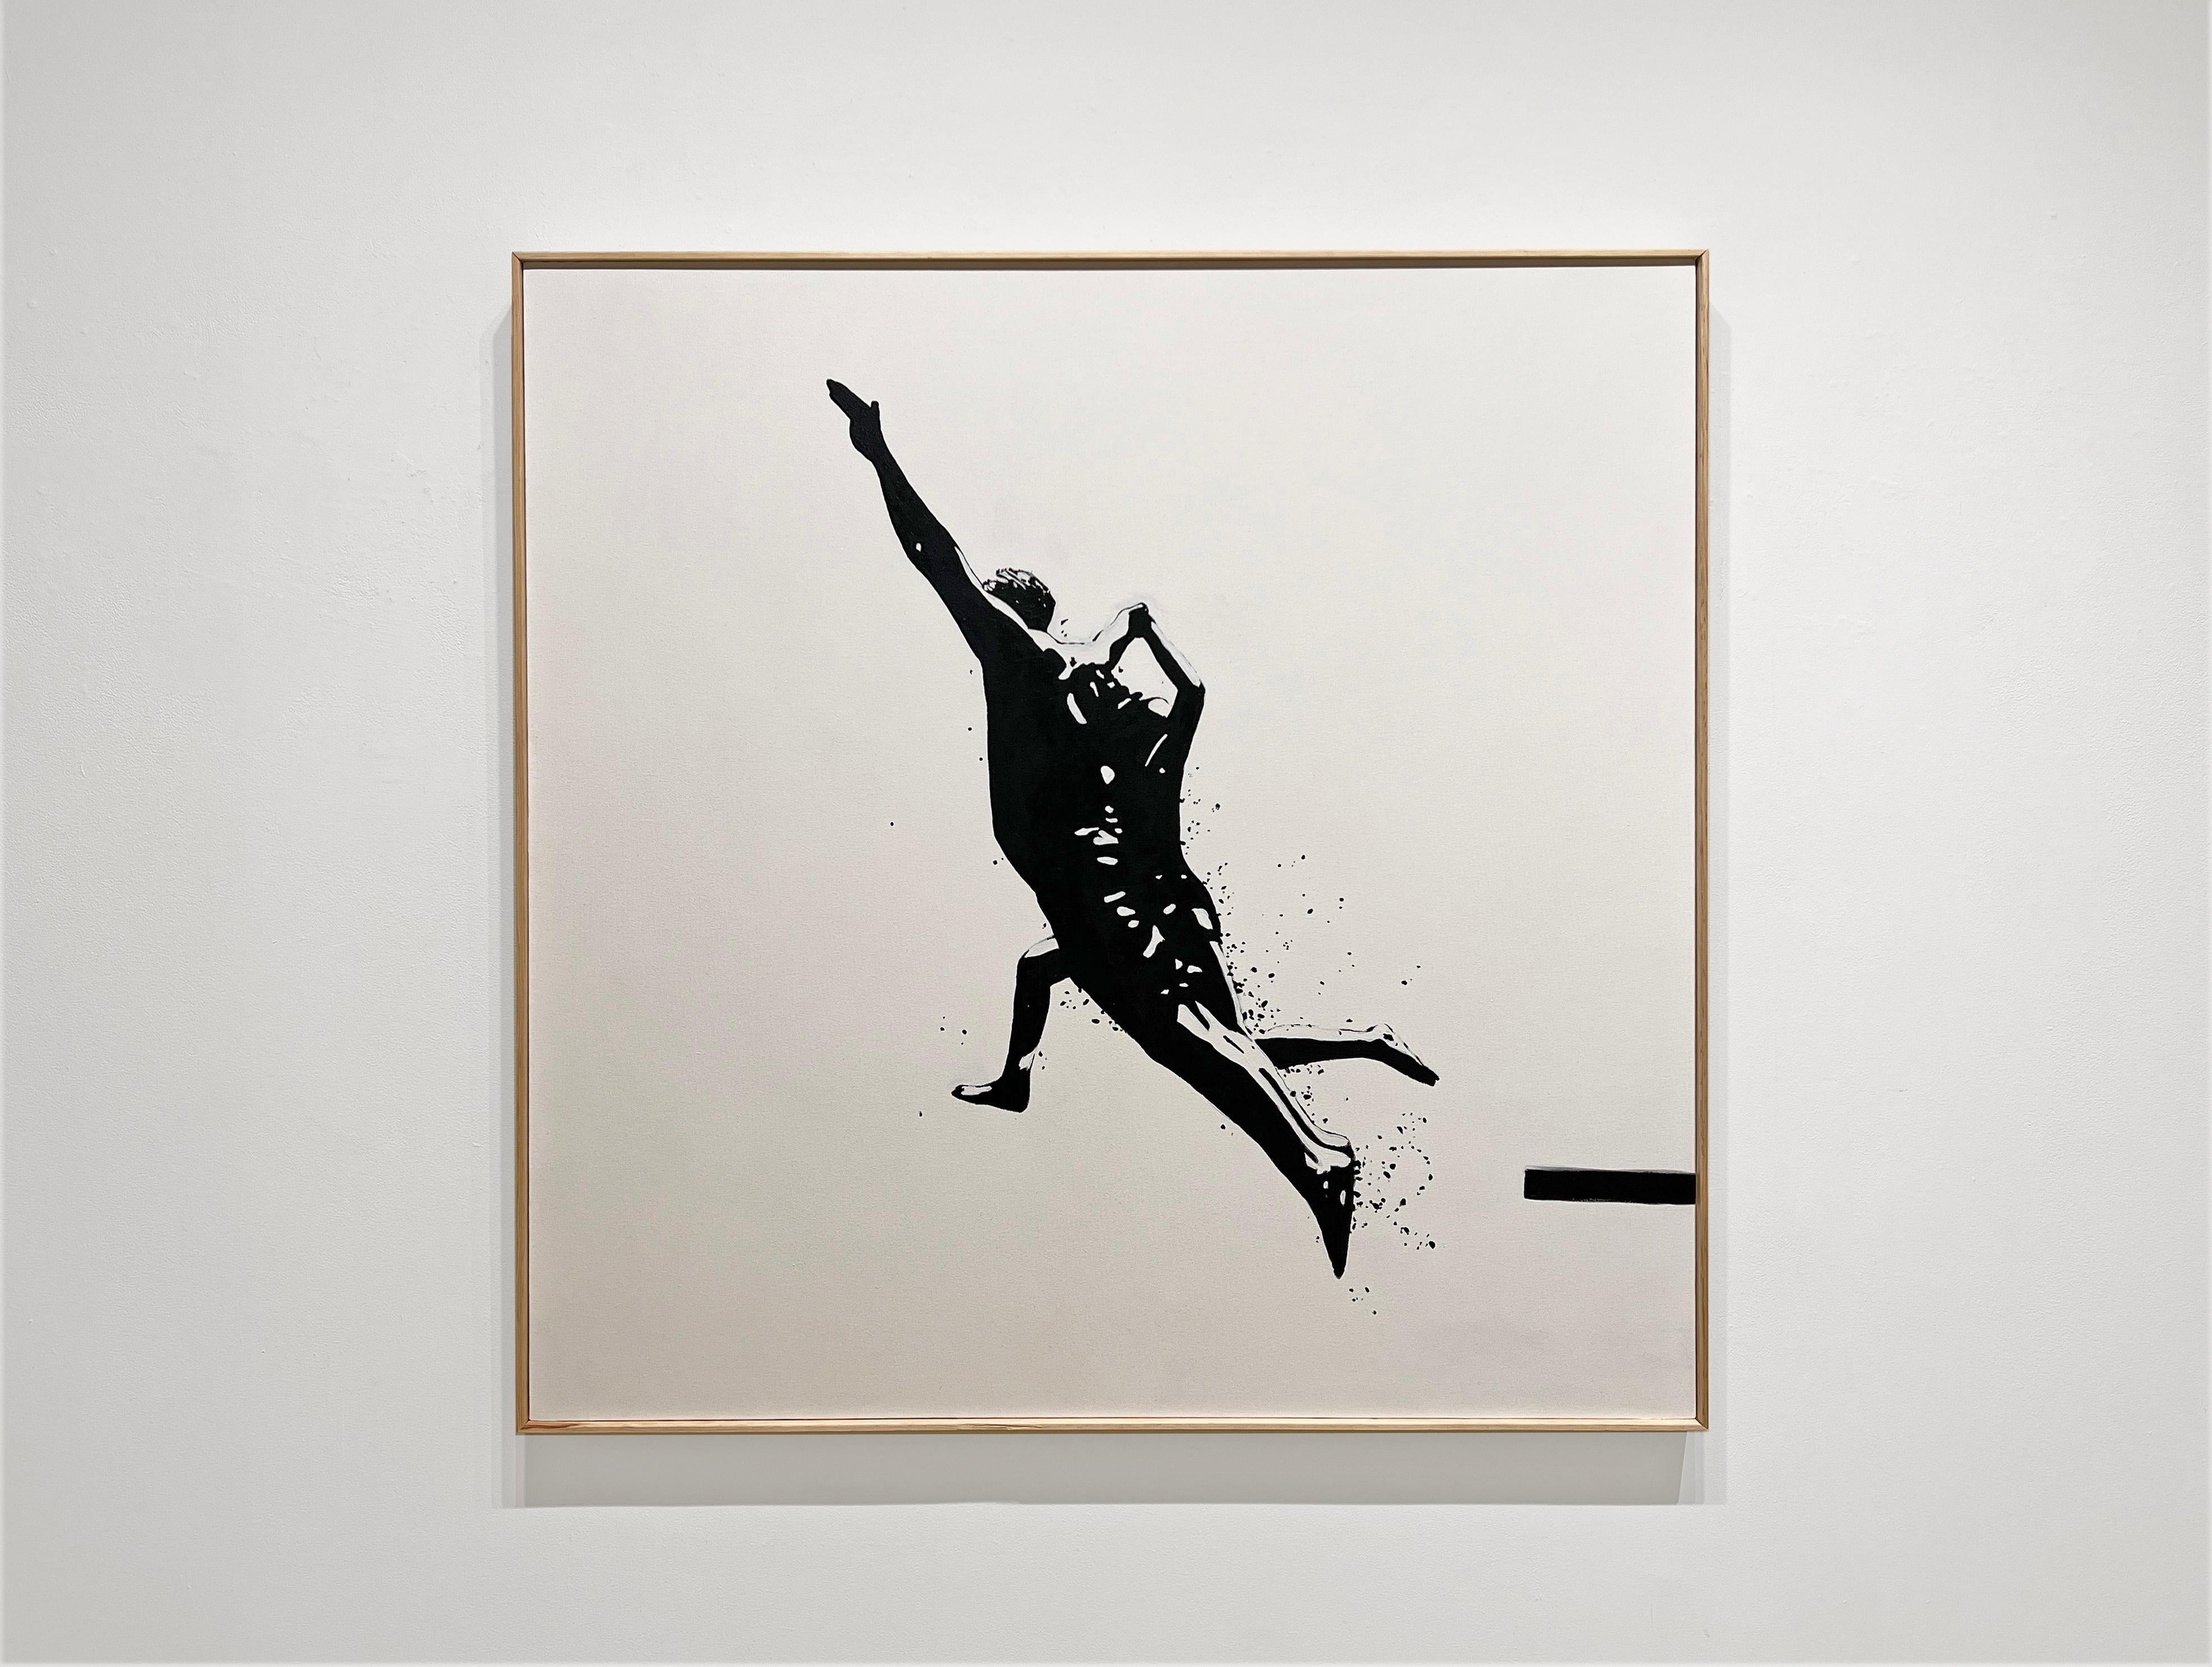 LAUNCHING - Contemporary Figurative Pop Art / Black and White Silhouette - Painting by Eric Zener